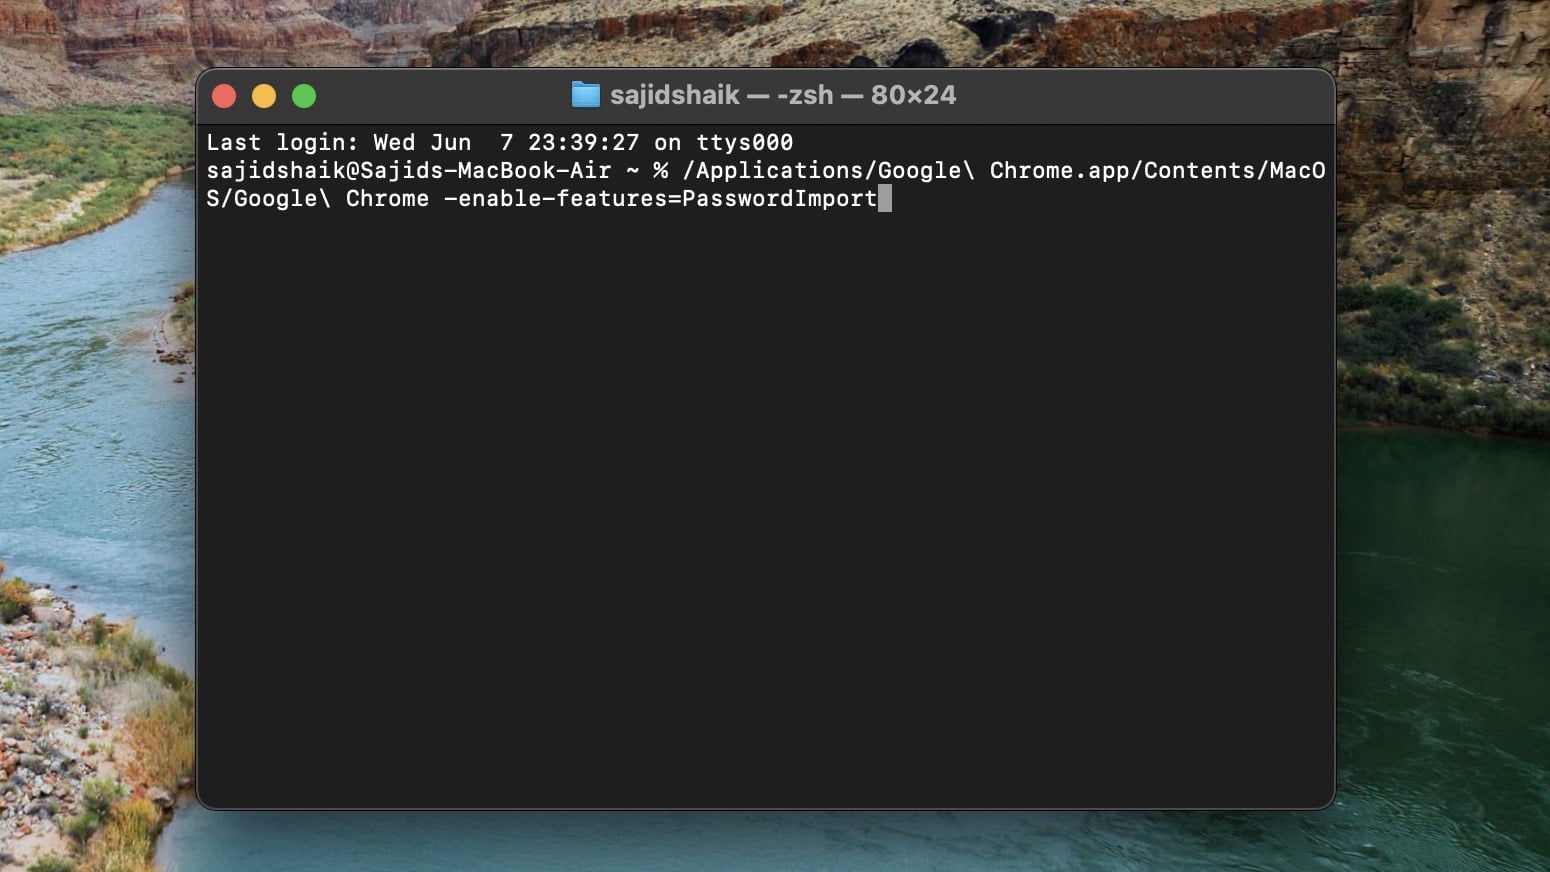 Enter the Terminal command to enable Import Passwords option in Chrome